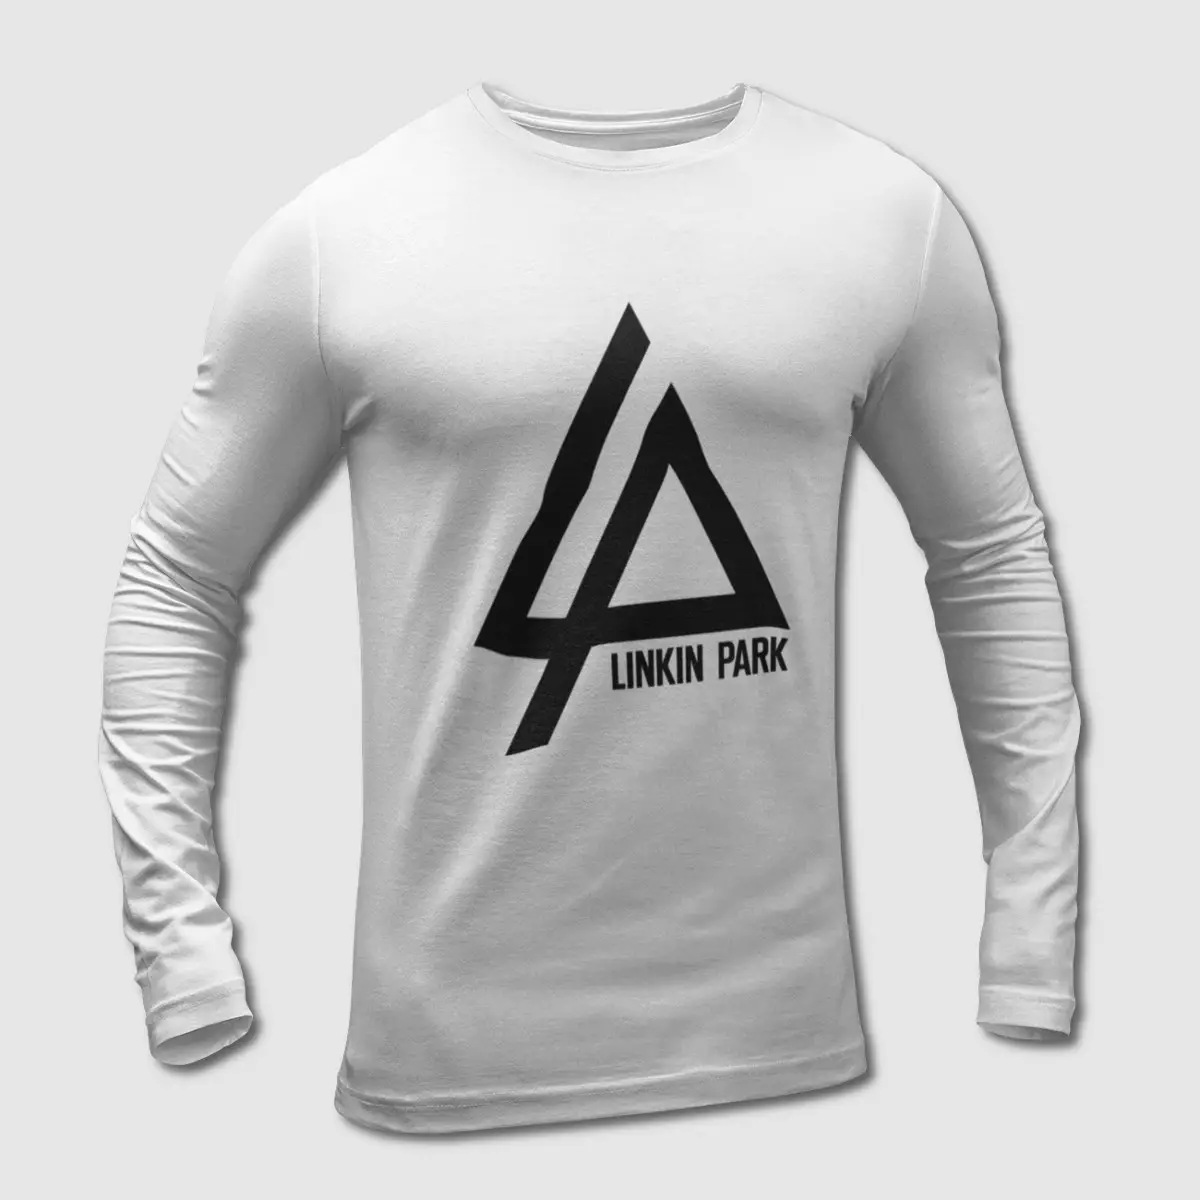 Official Linkin Park Merchandise: Elevate Your Style